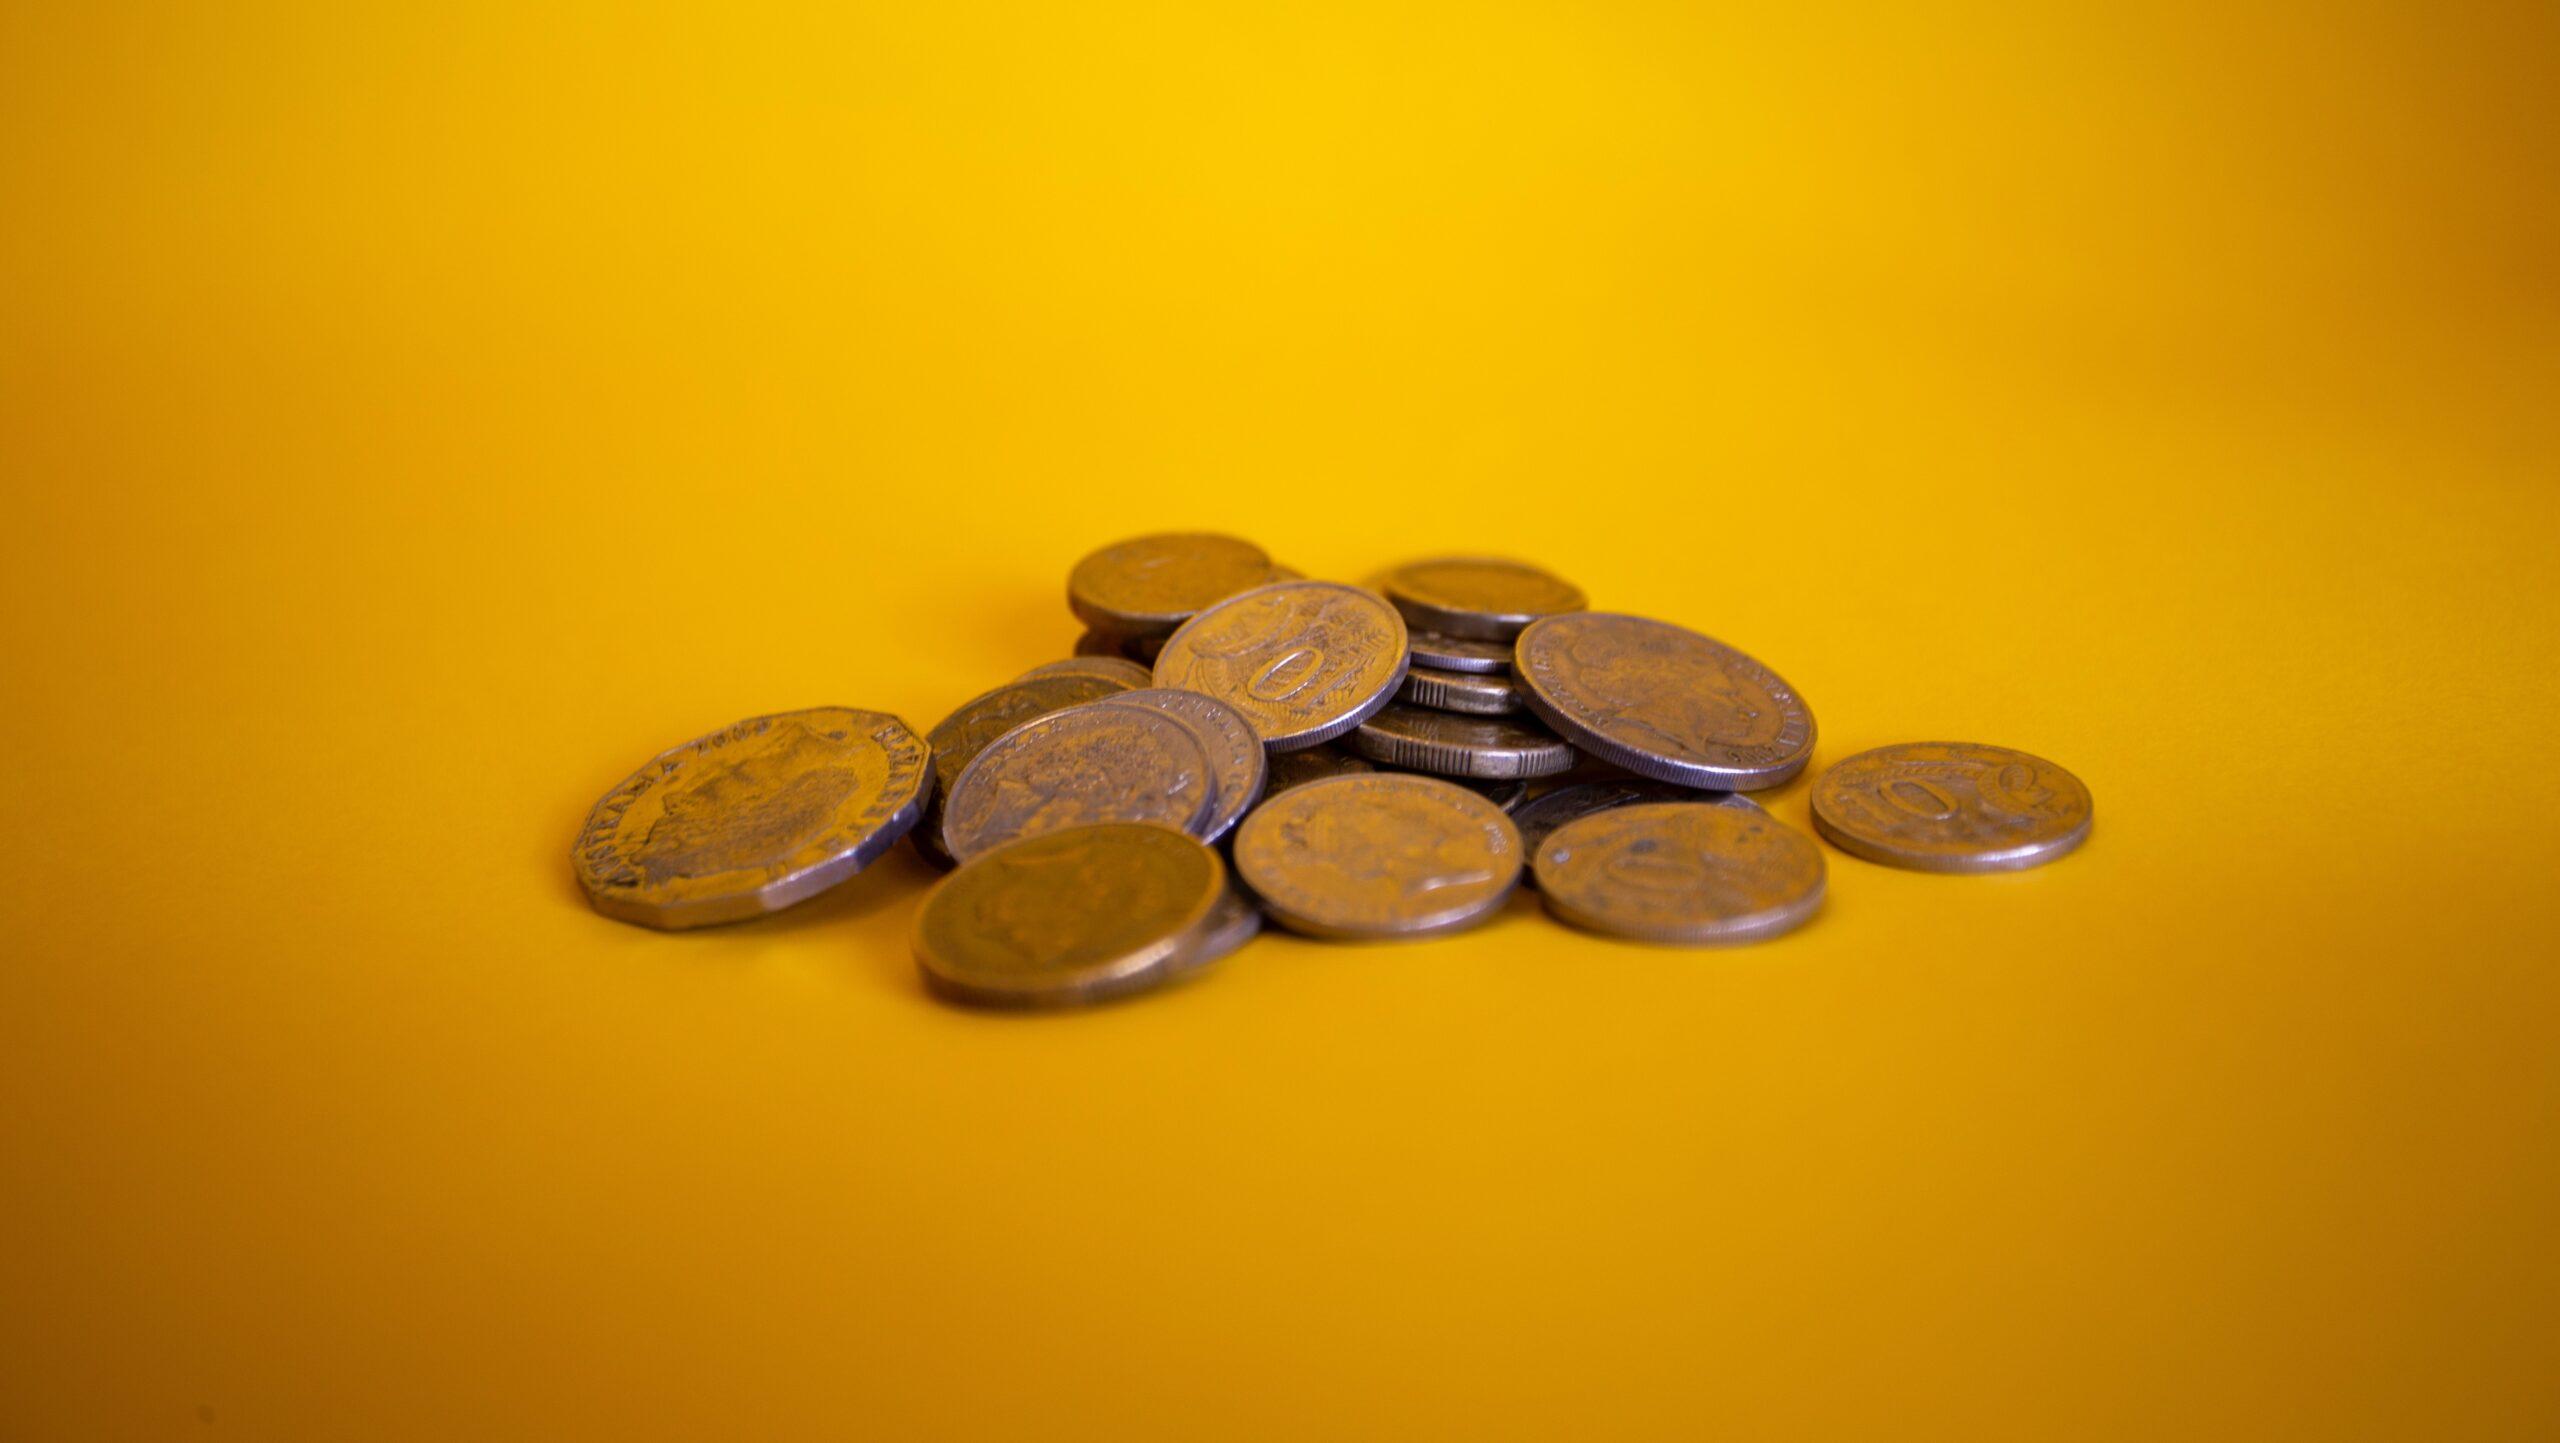 Australian coins in a pile against a yellow background.